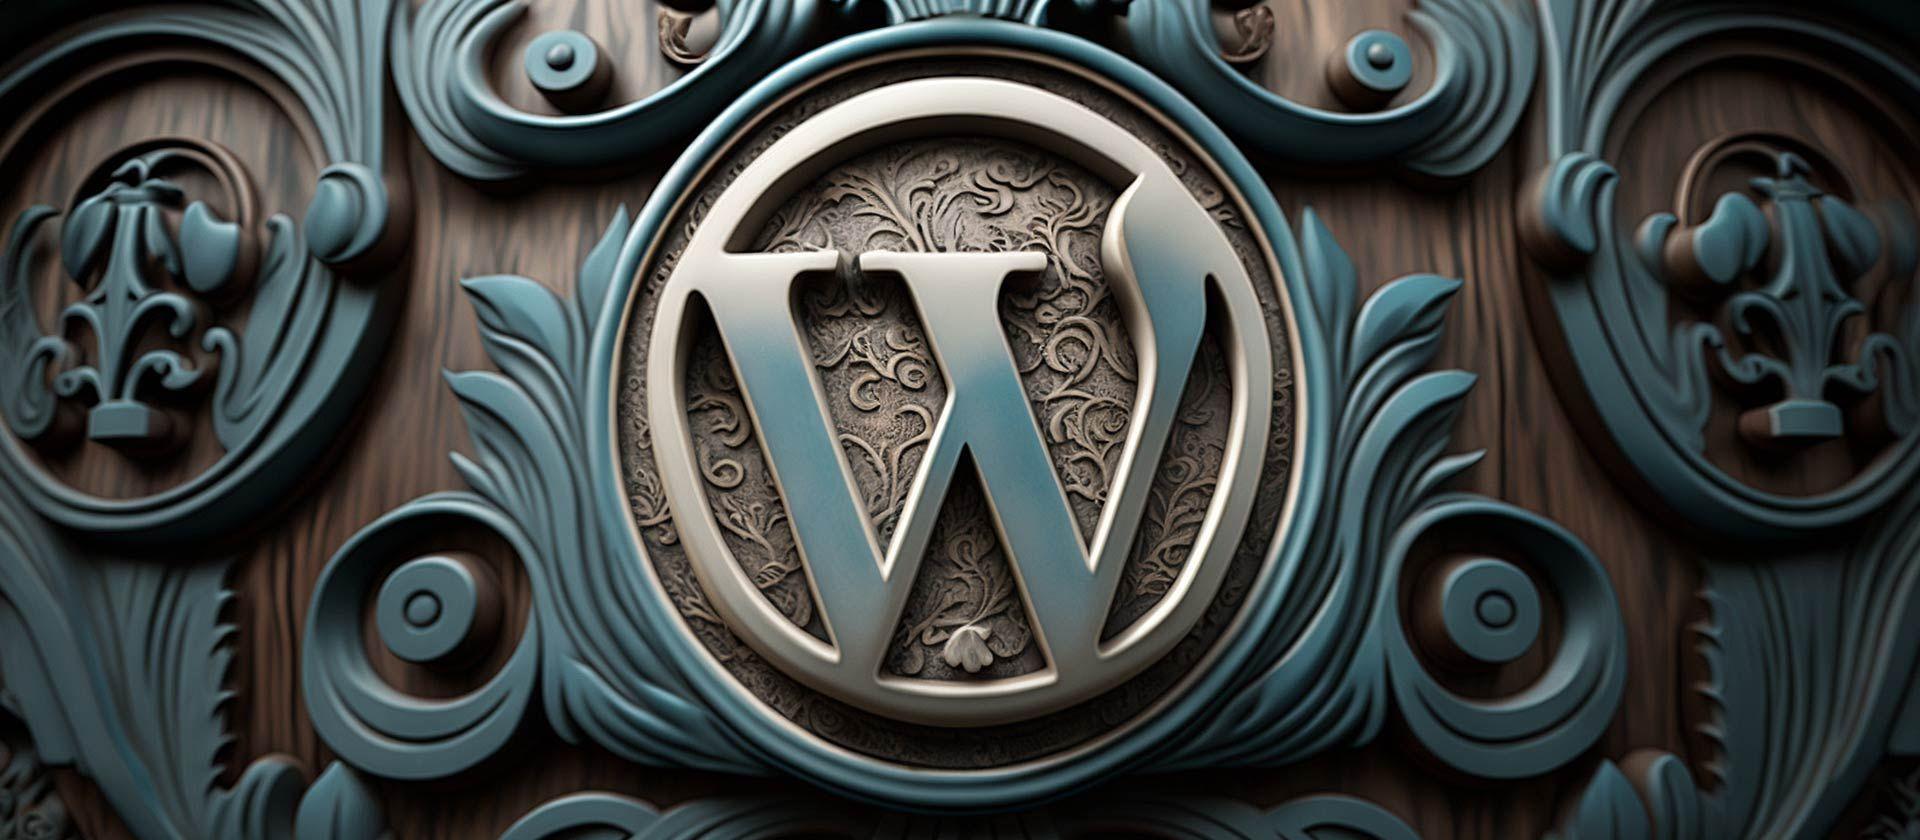 Ornate 3d rendering of the Wordpress logo carved into a panel